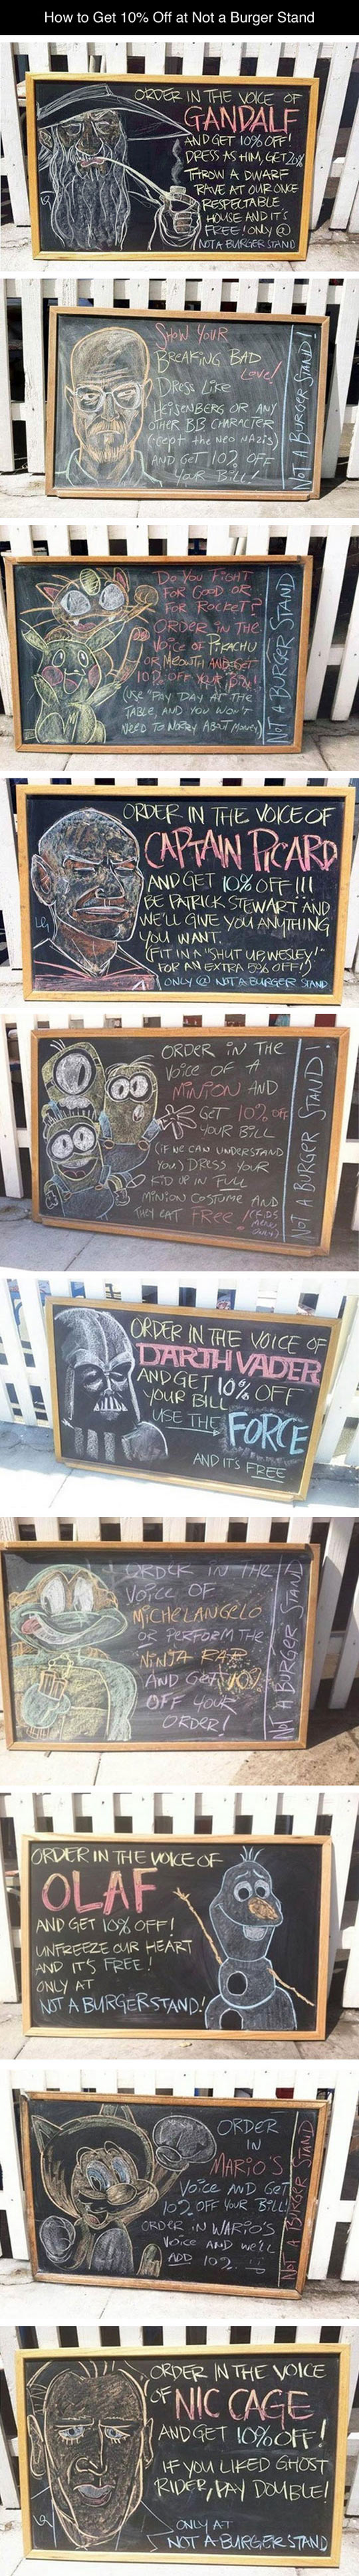 This Restaurant Is Doing Things The Right Way